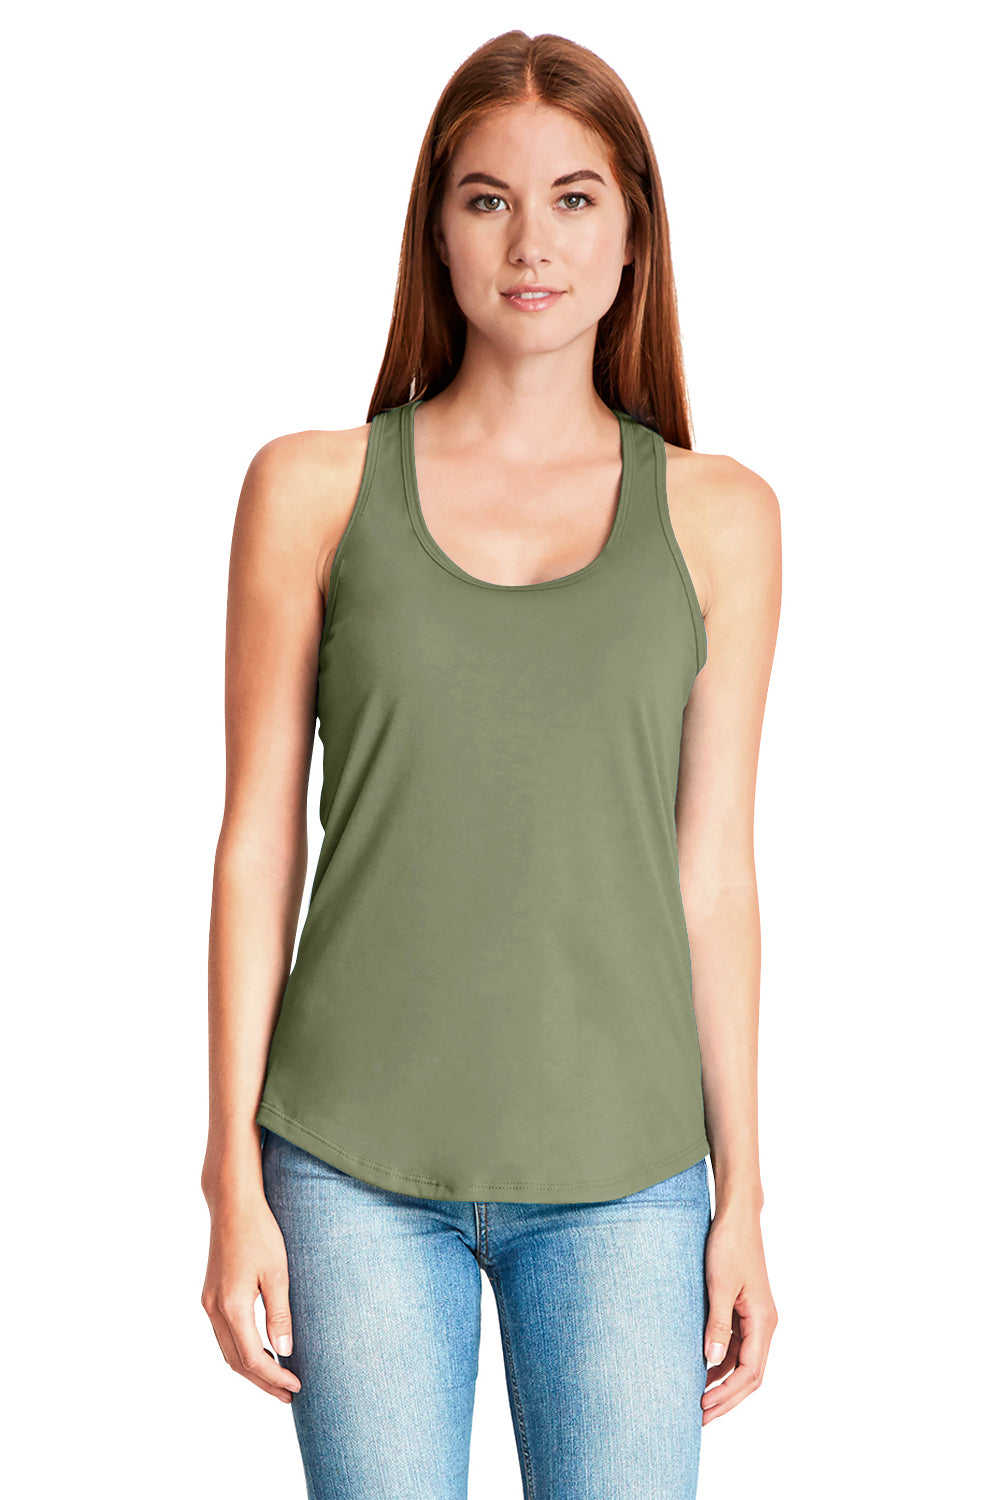 Next Level 6338 Womens Gathered Tank Top Military Green Front